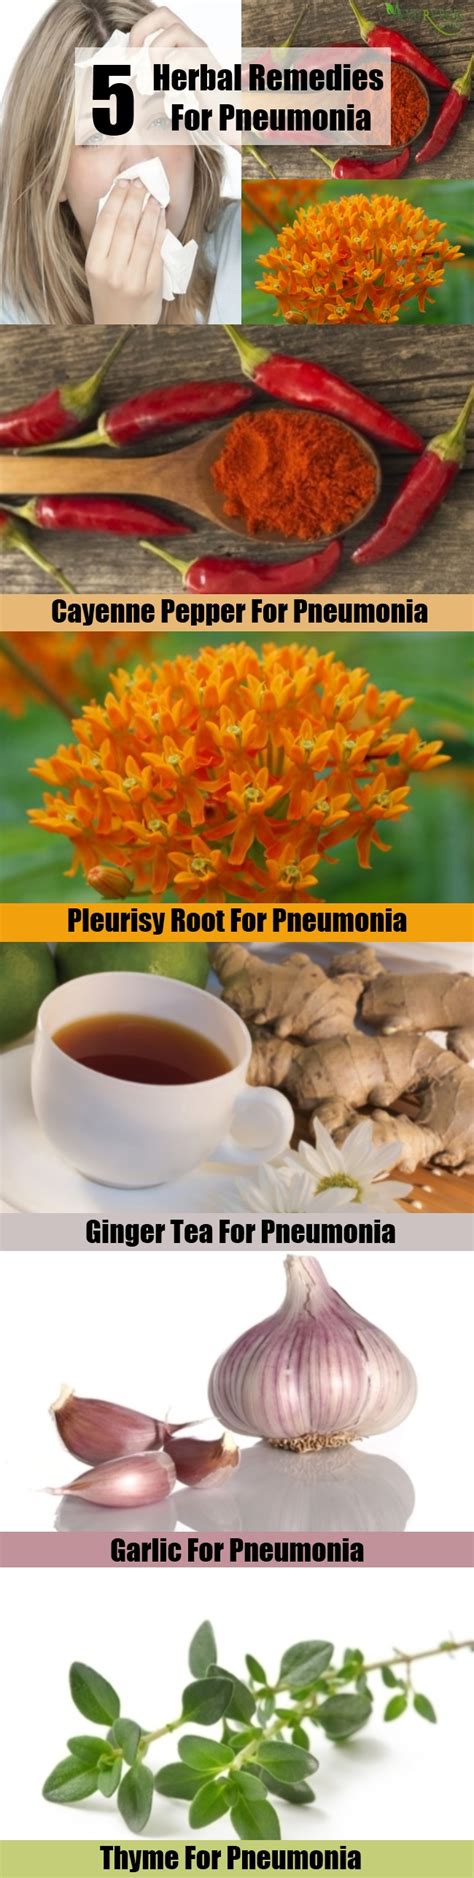 Pneumonia Herbal Remedies Treatments And Cures